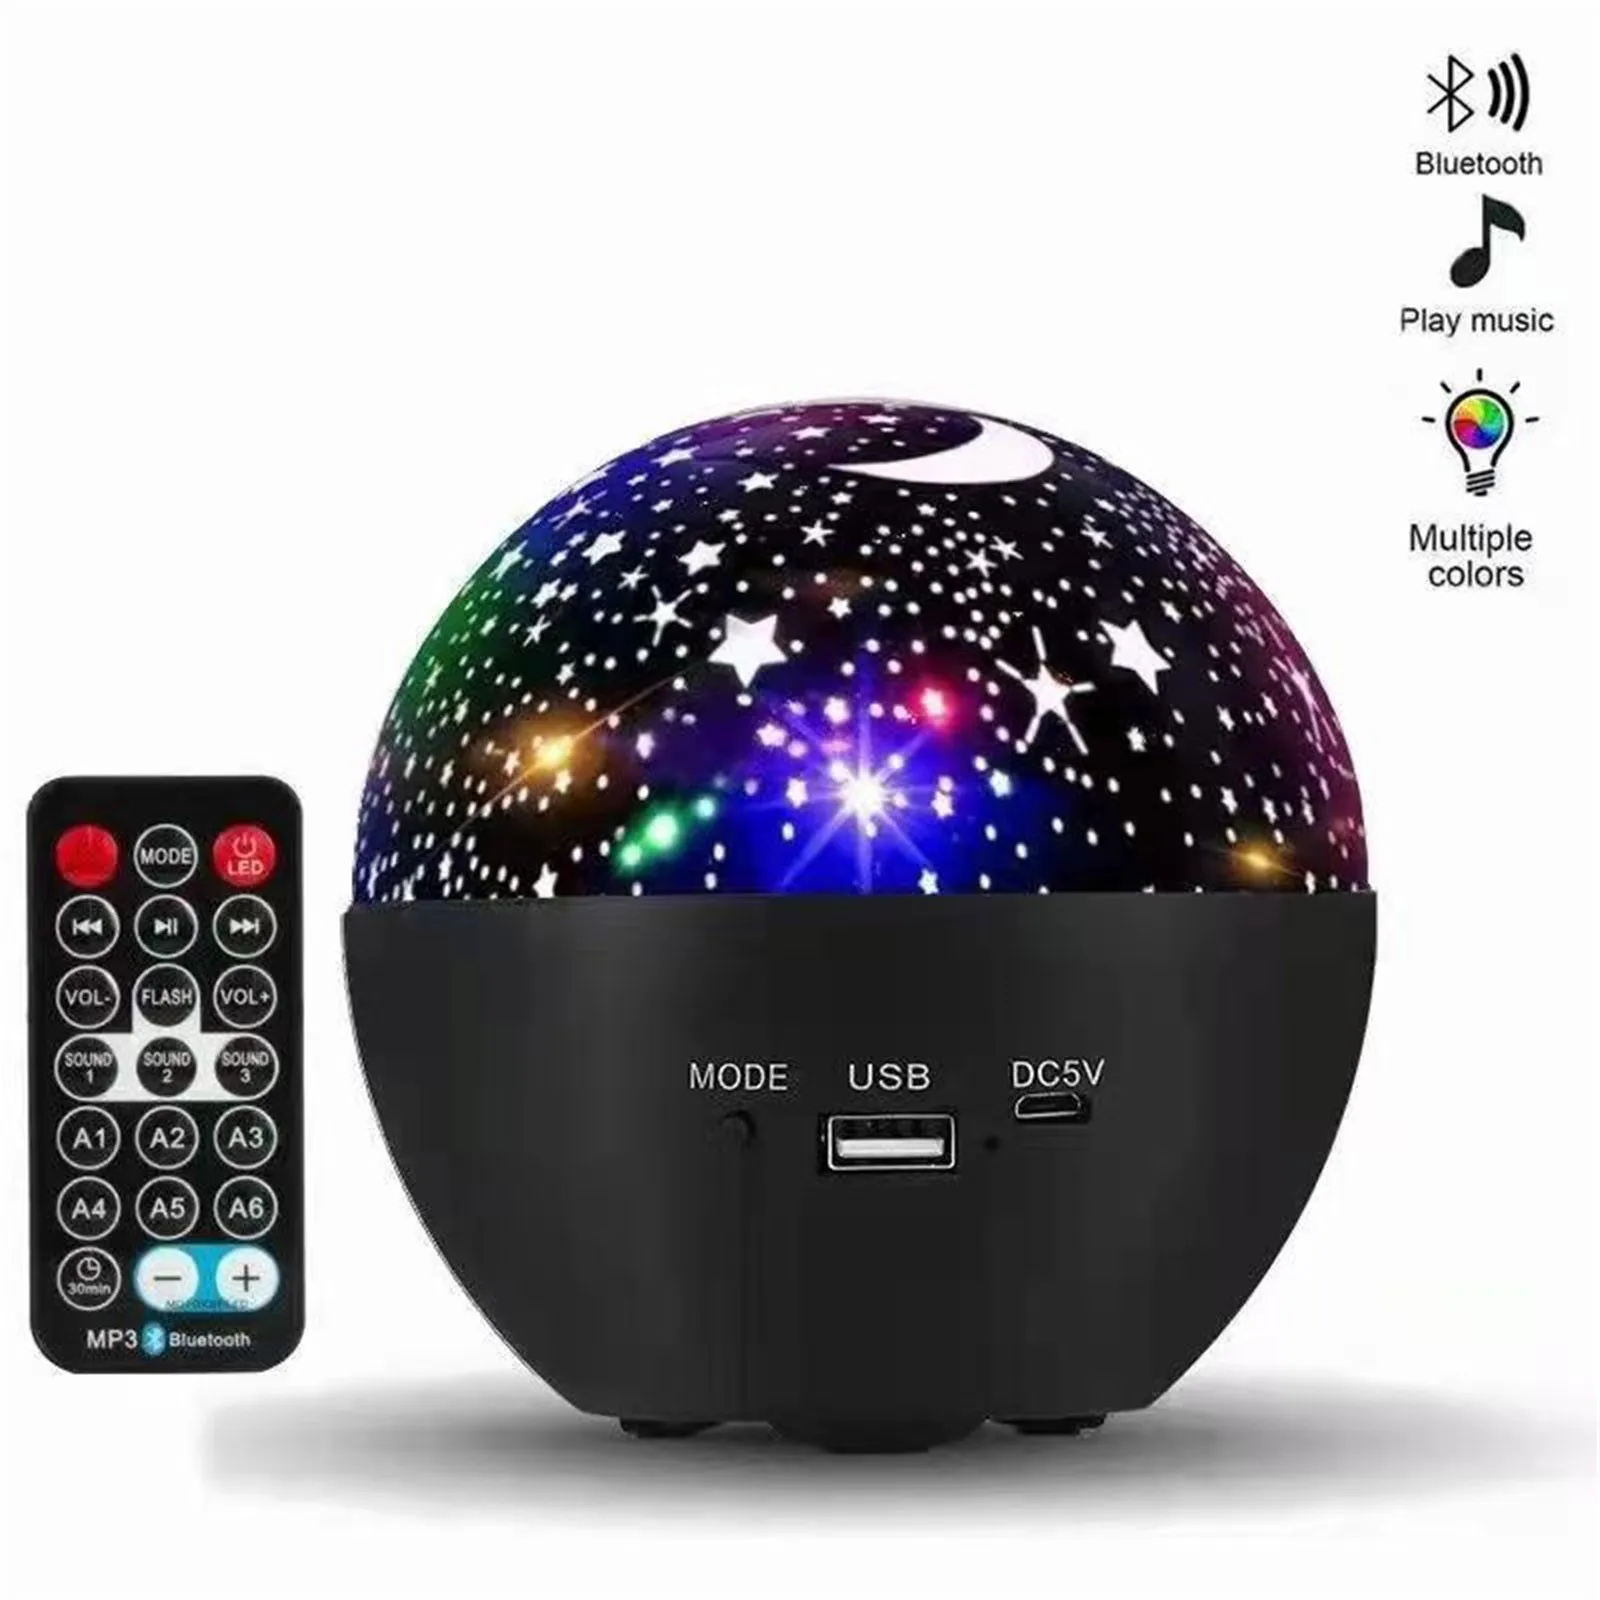 Usb Projection Lamp Magic Ball Light Sky Full Of Sky Projection Lighting Flashing Stage Atmosphere Night Lights For Bedroom wall night light Night Lights